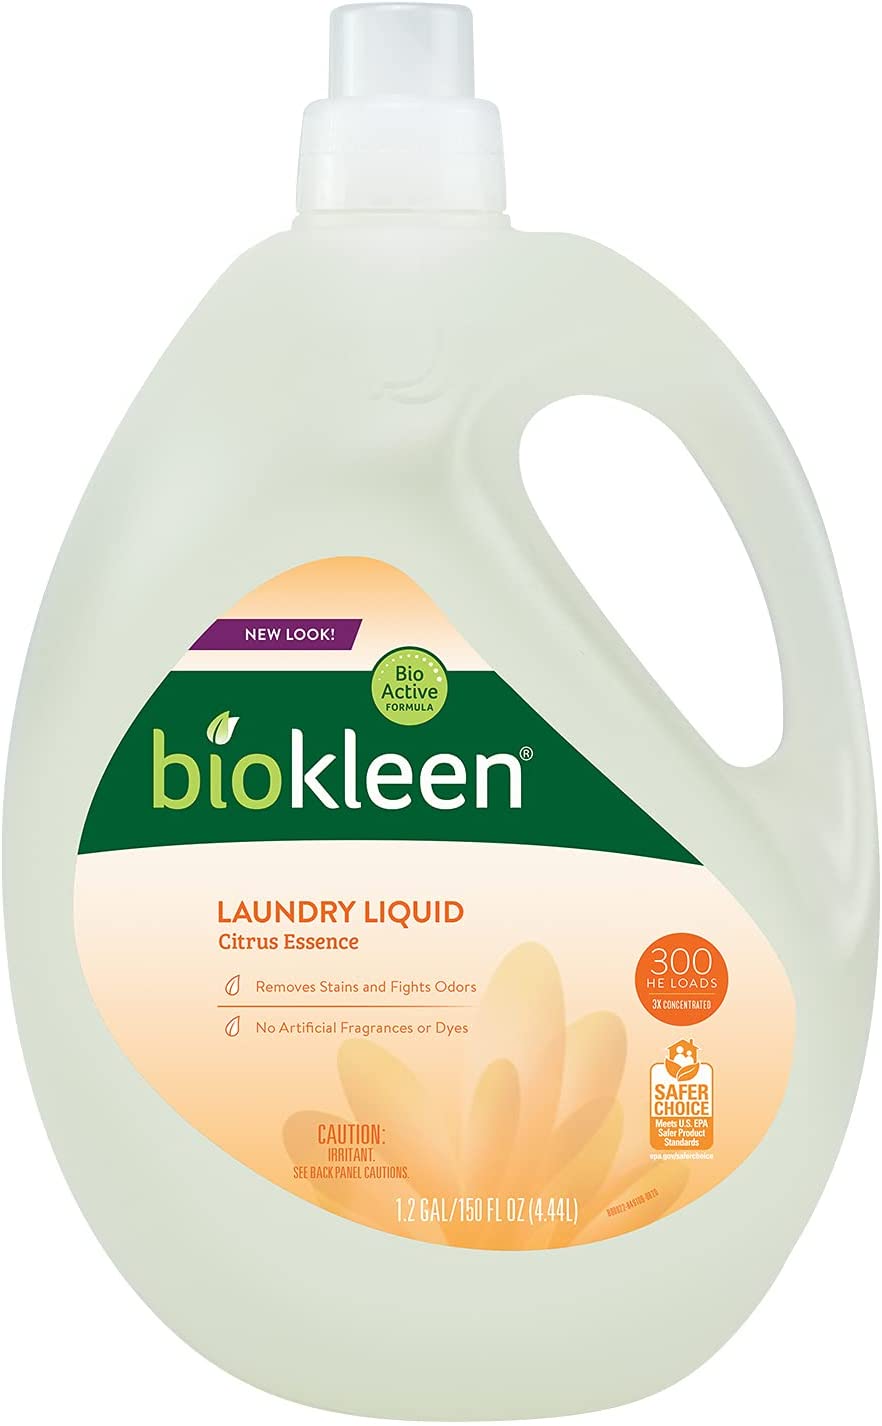 Biokleen Natural Laundry Detergent Liquid - 300 Loads- Eco Friendly Concentrated Plant Based Safe for Kids and Pets No Artificial Colors or Preservatives - image 1 of 6